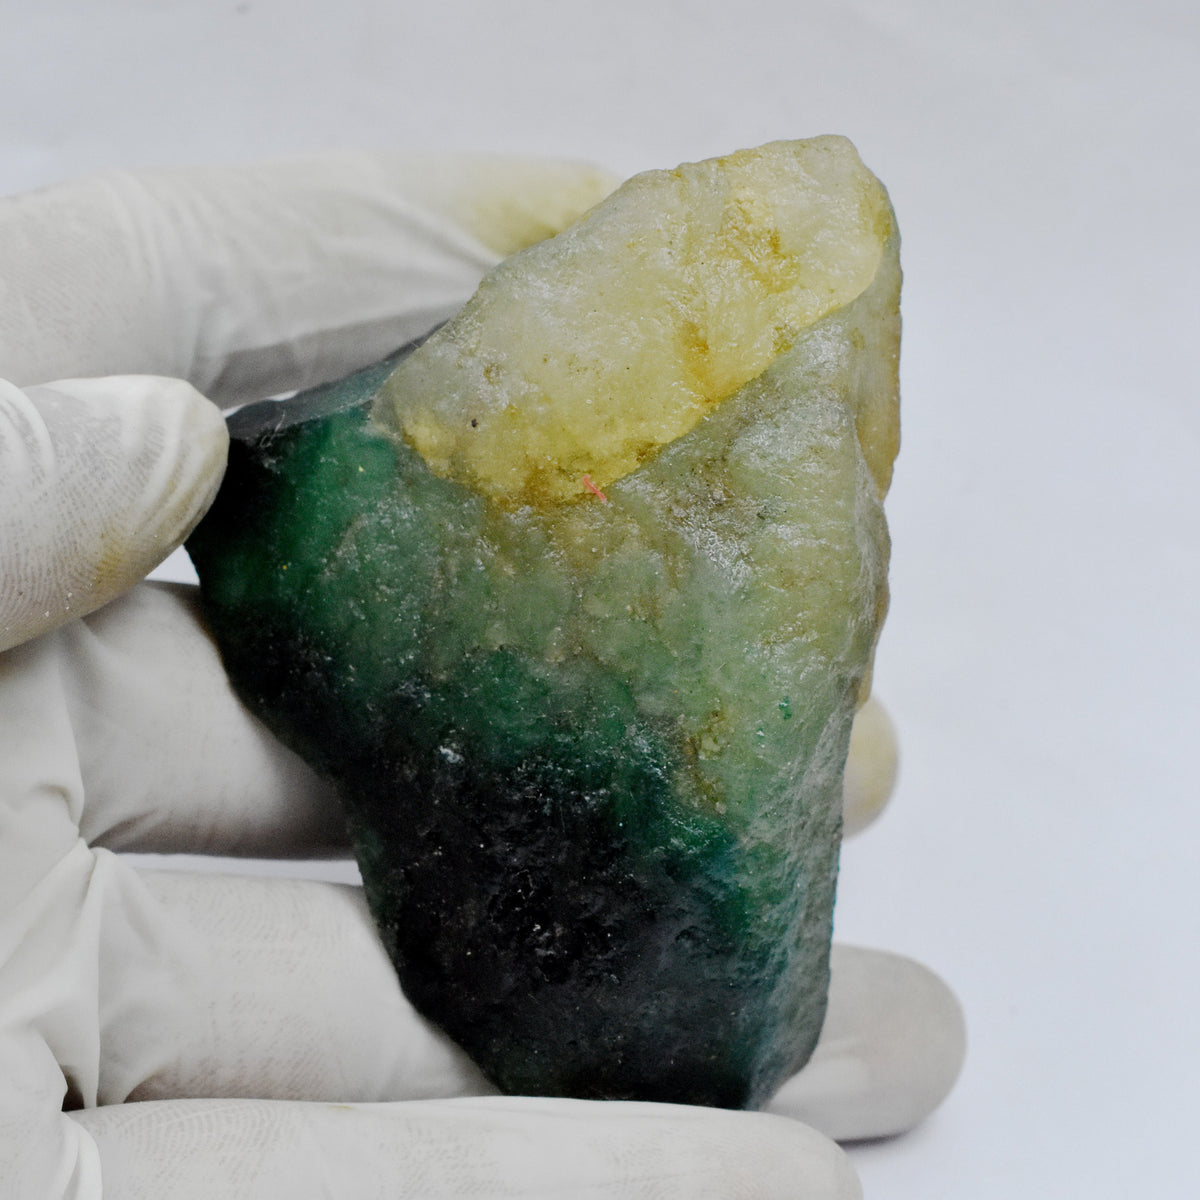 759.50 Ct Uncut Raw Rough Natural Fluorite Multi Color Loose Gemstone CERTIFIED Loose Rough Gemstone CERTIFIED Excellent Quality Healing Earth Mined Uncut Chunk